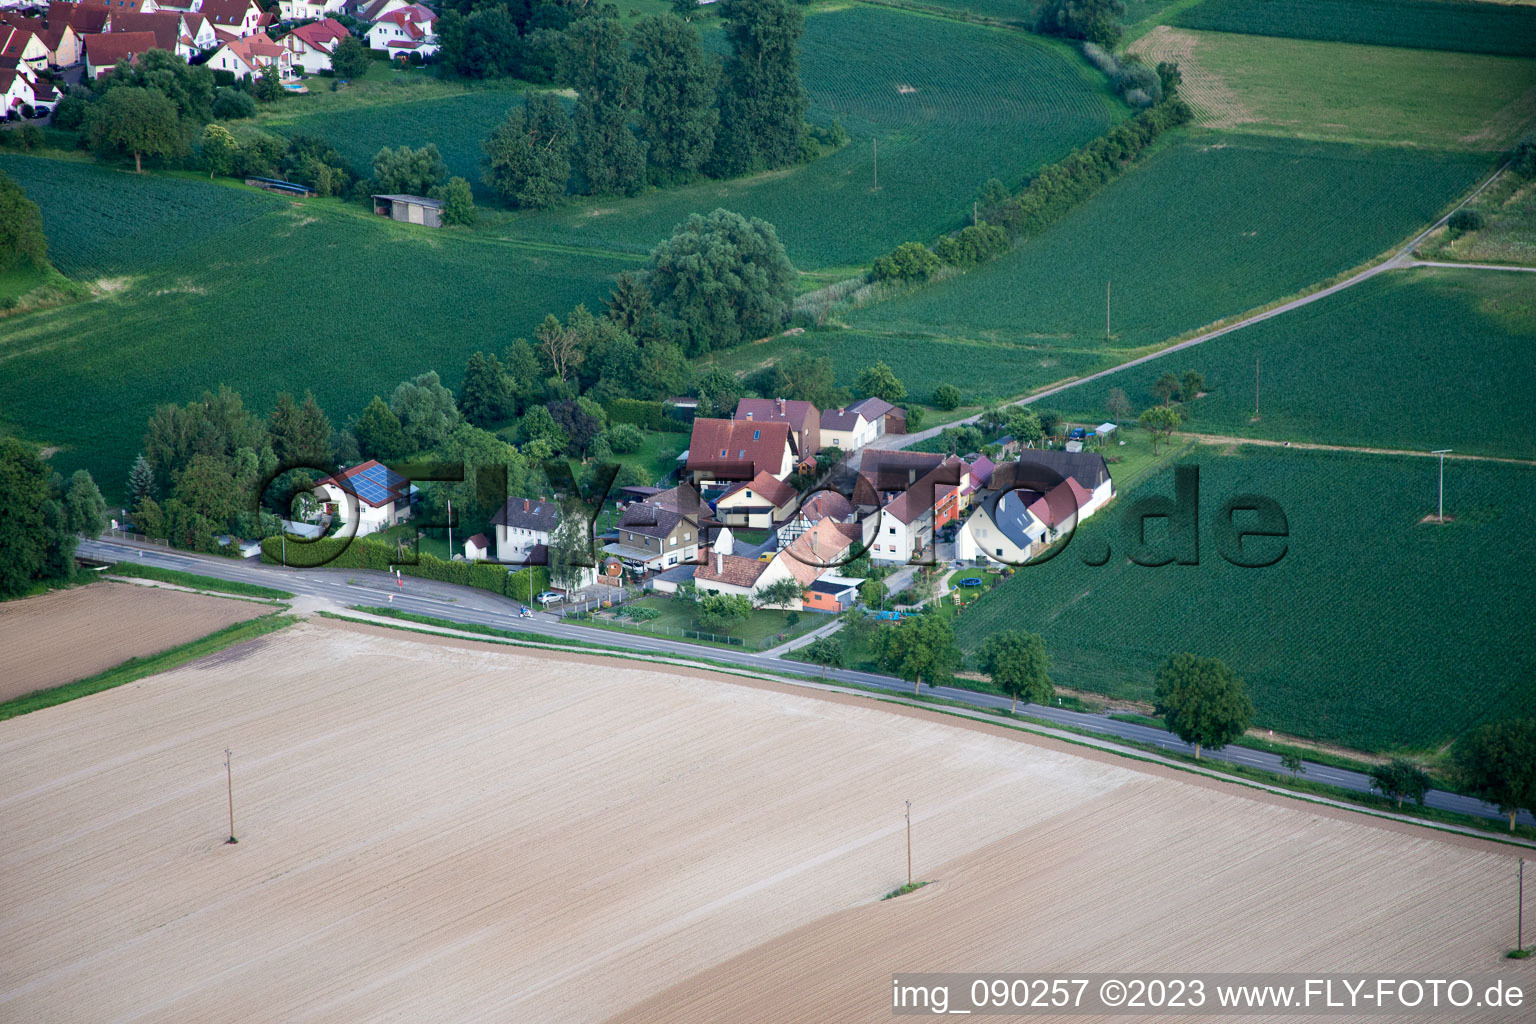 Minfeld in the state Rhineland-Palatinate, Germany viewn from the air